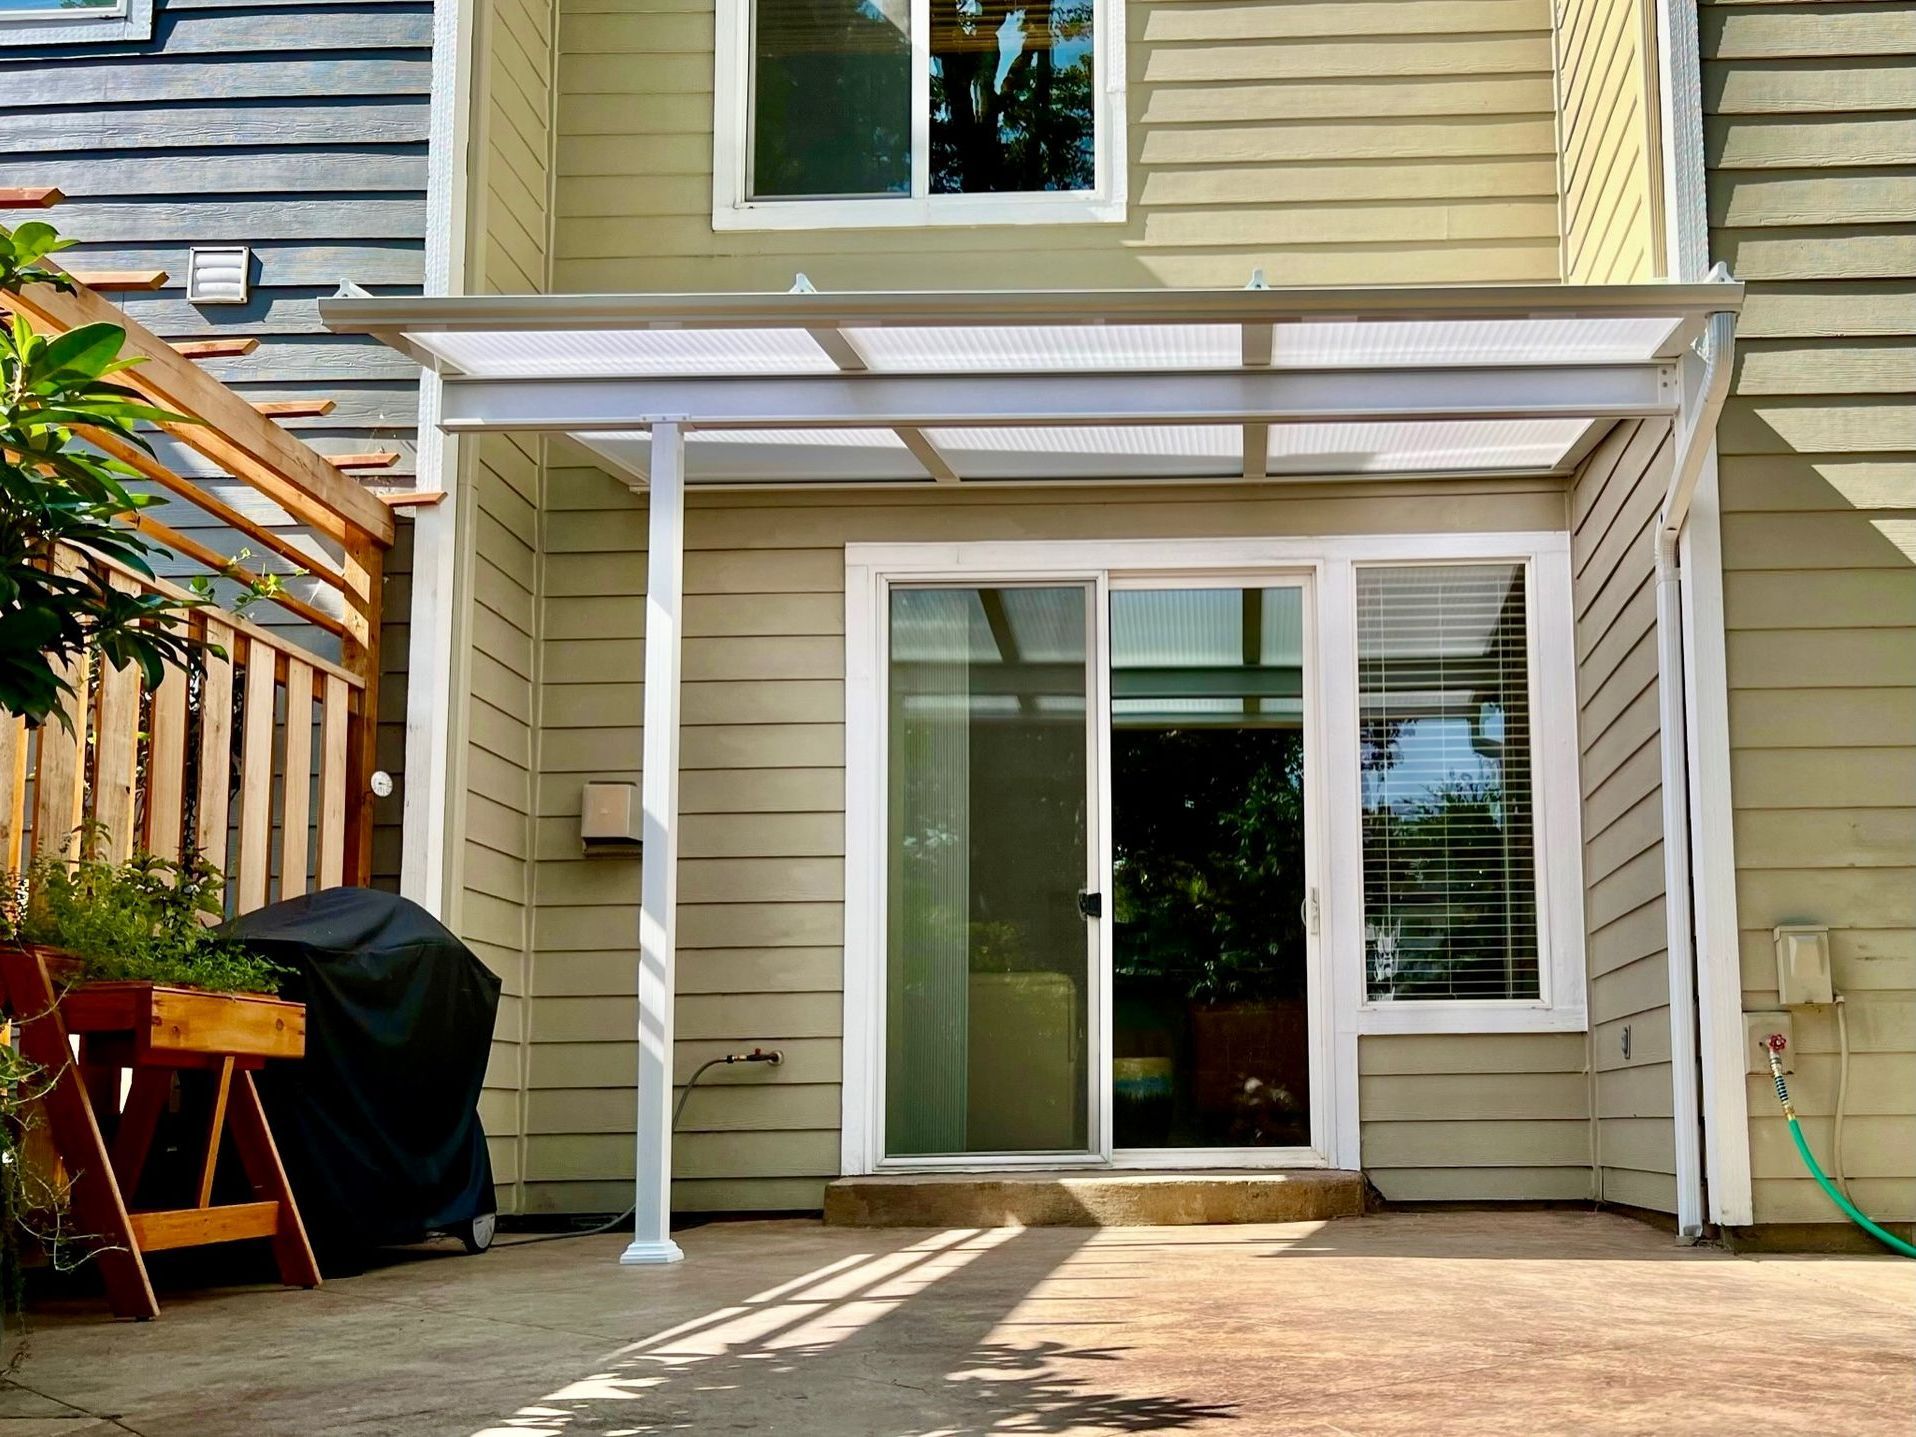 After Crown Patio Covers Installed a White Shed Style Patio Cover on this house in West Linn